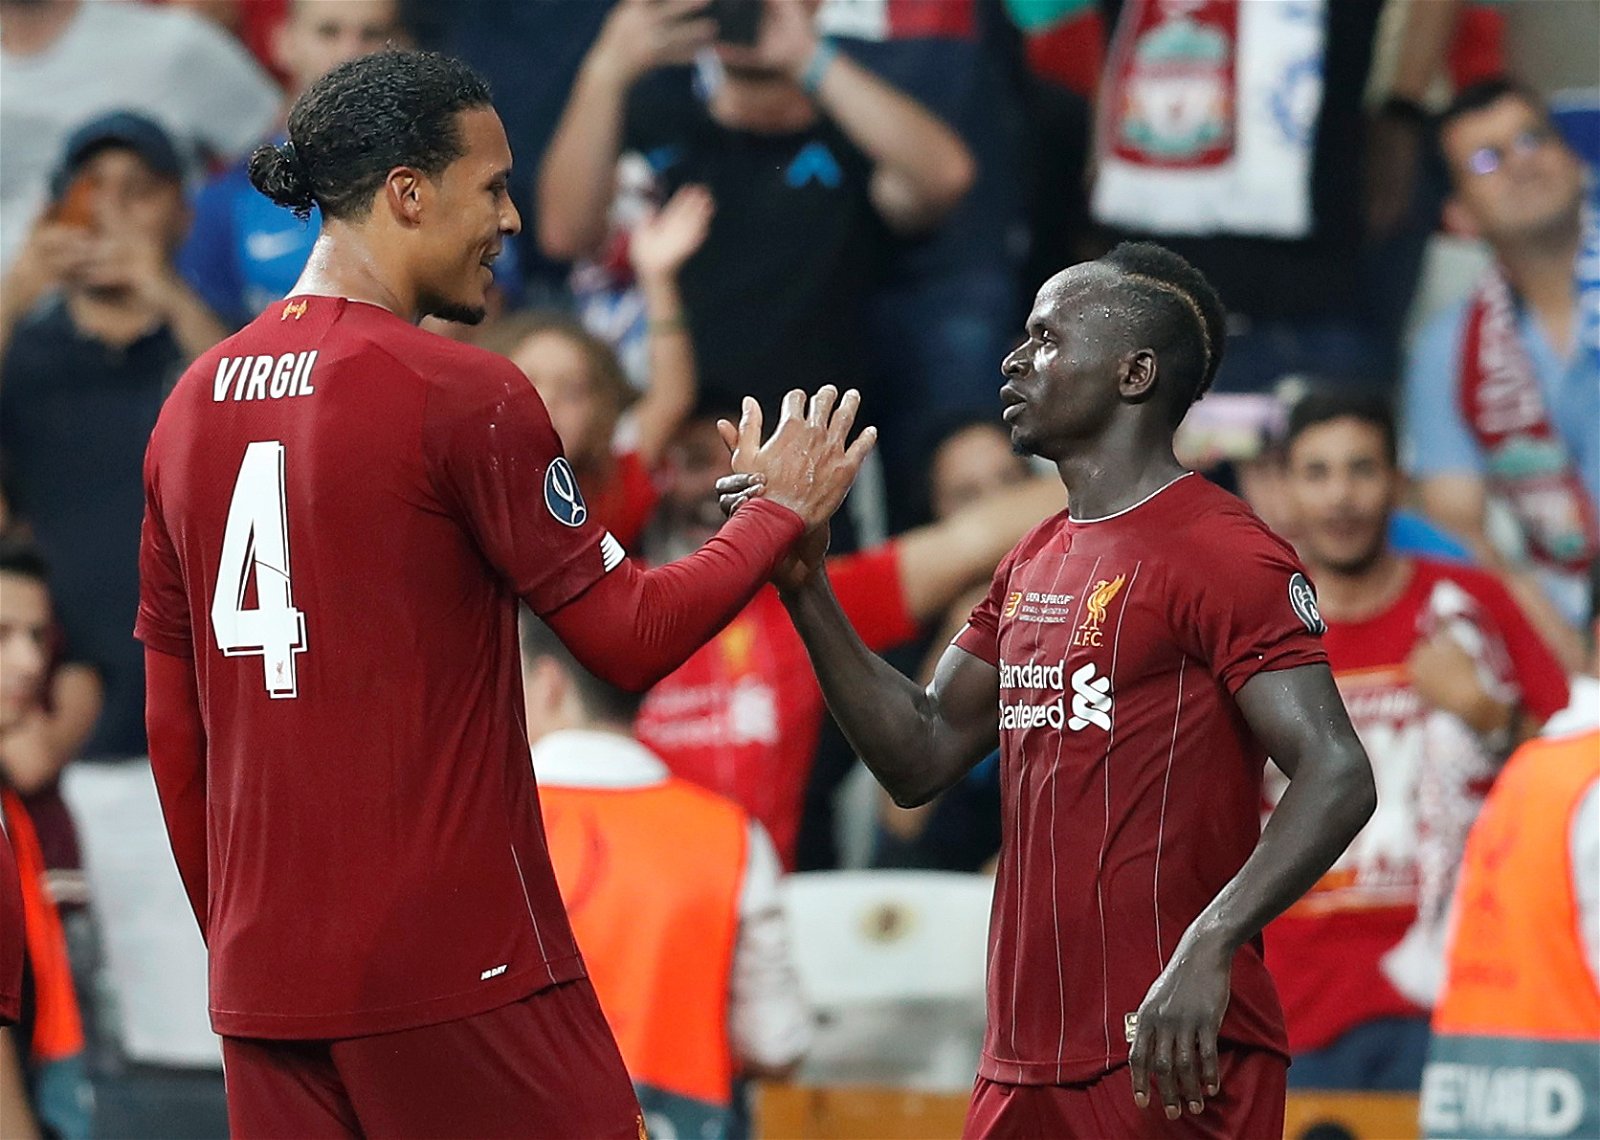 VVD hails Liverpool for important Super Cup win